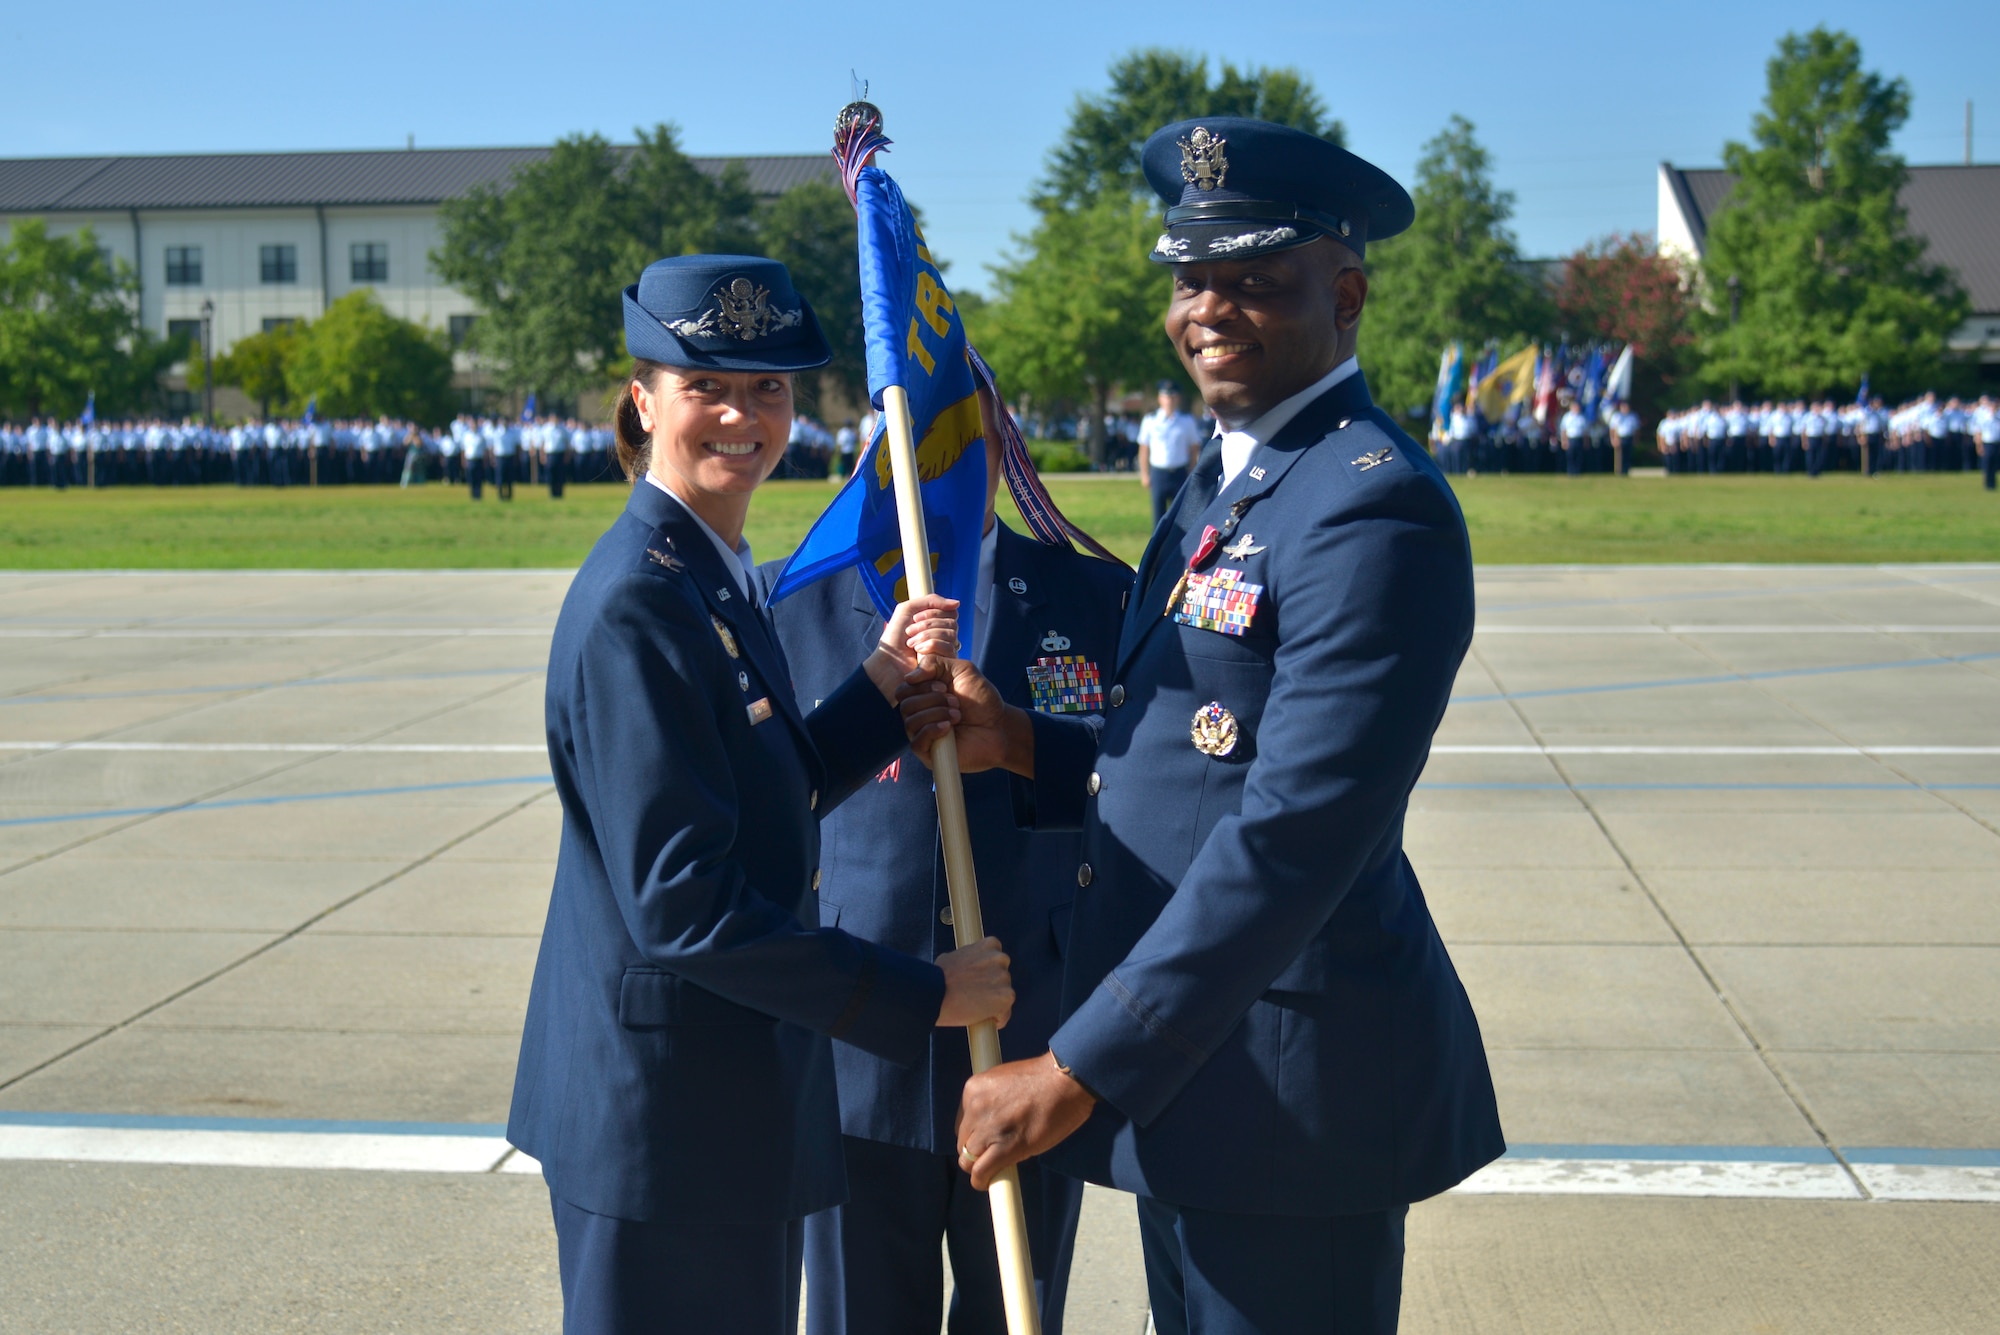 U.S. Air Force Col. Heather Blackwell, 81st Training Wing commander, takes the guidon from Col. Leo Lawson Jr., outgoing 81st Training Group commander, during the 81st TRG change of command ceremony at the Levitow Training Support Facility drill pad at Keesler Air Force Base, Mississippi, July 1, 2019. The ceremony is a symbol of command being exchanged from one commander to the next. Lawson passed on command of the 81st TRG to Col. Chance Geray, incoming 81st TRG commander. (U.S. Air Force photo by Airman Seth Haddix)